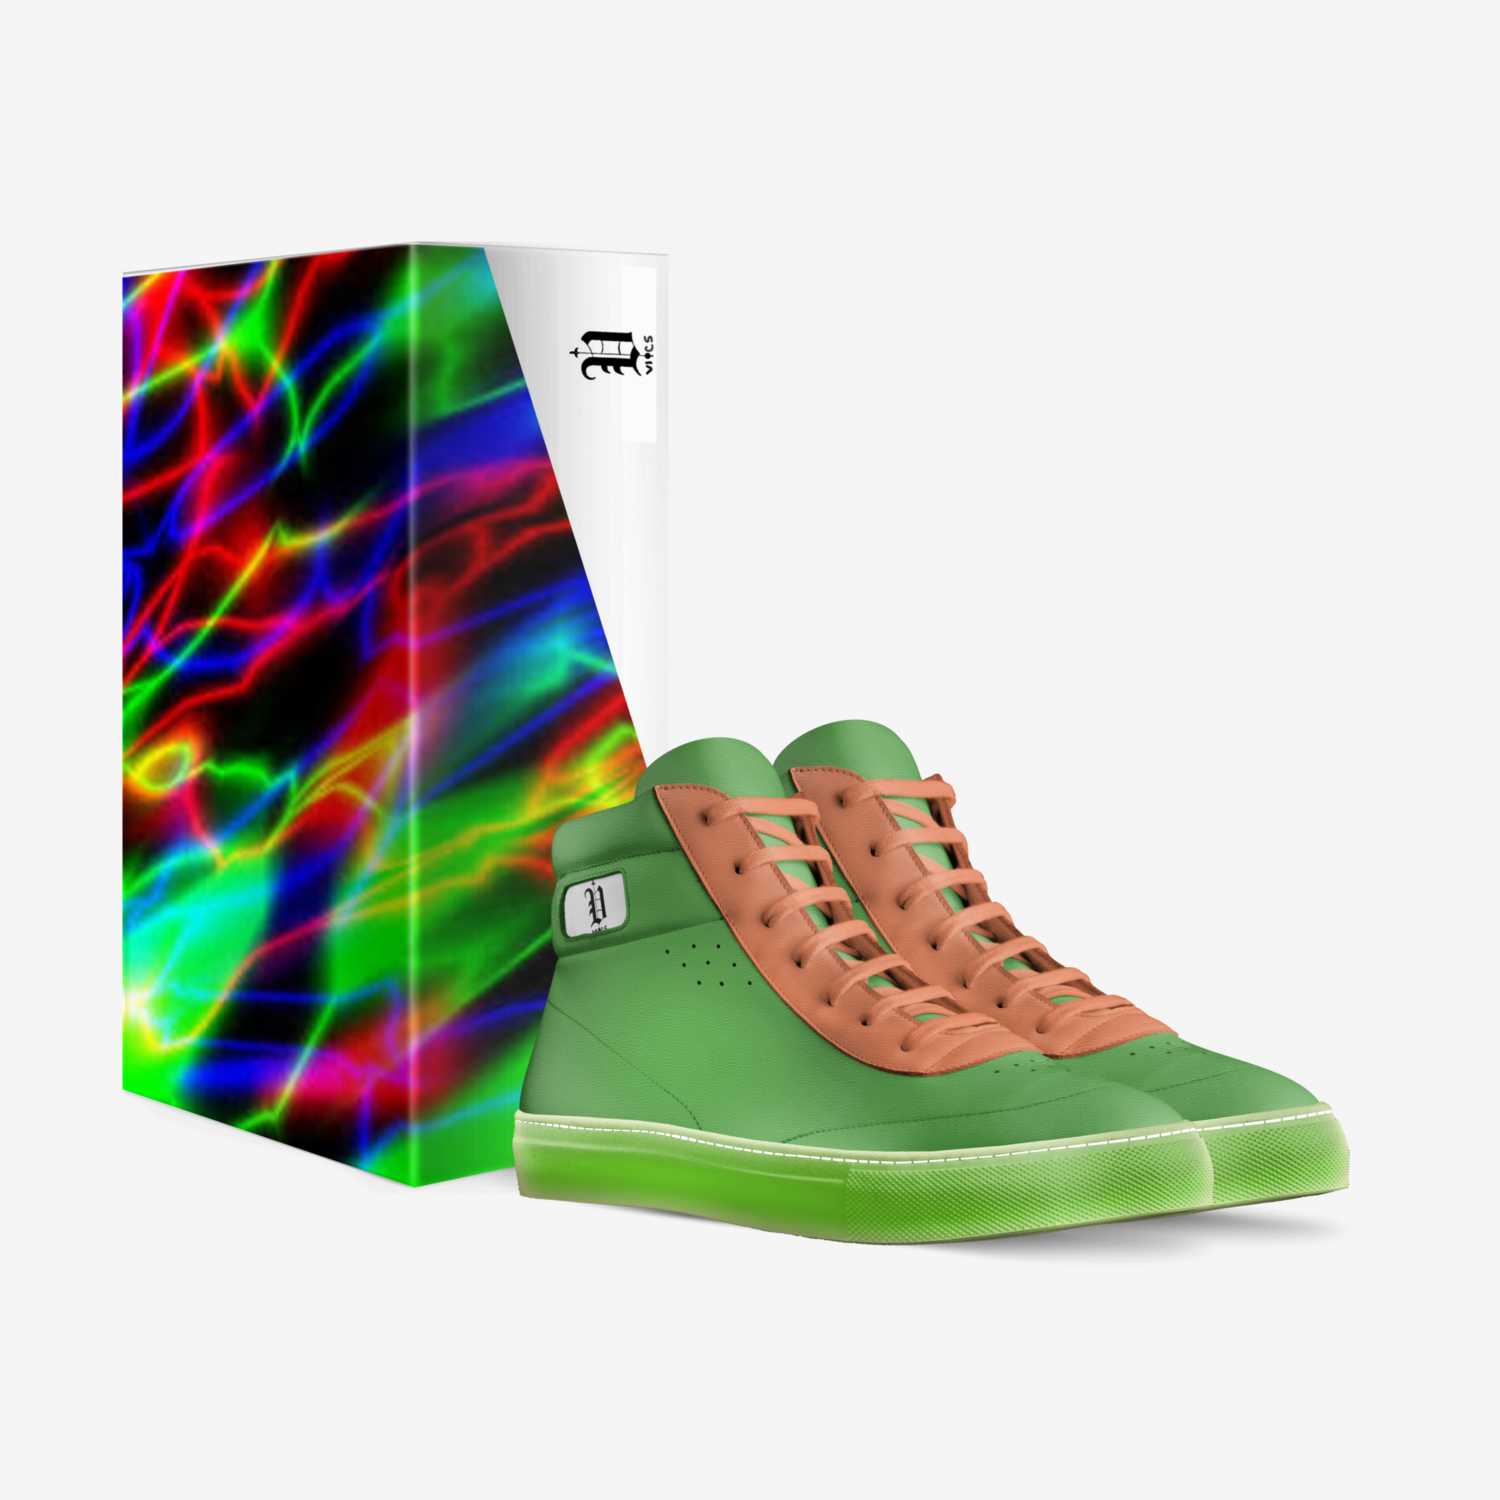 Vics neon custom made in Italy shoes by Brayden Murphy | Box view